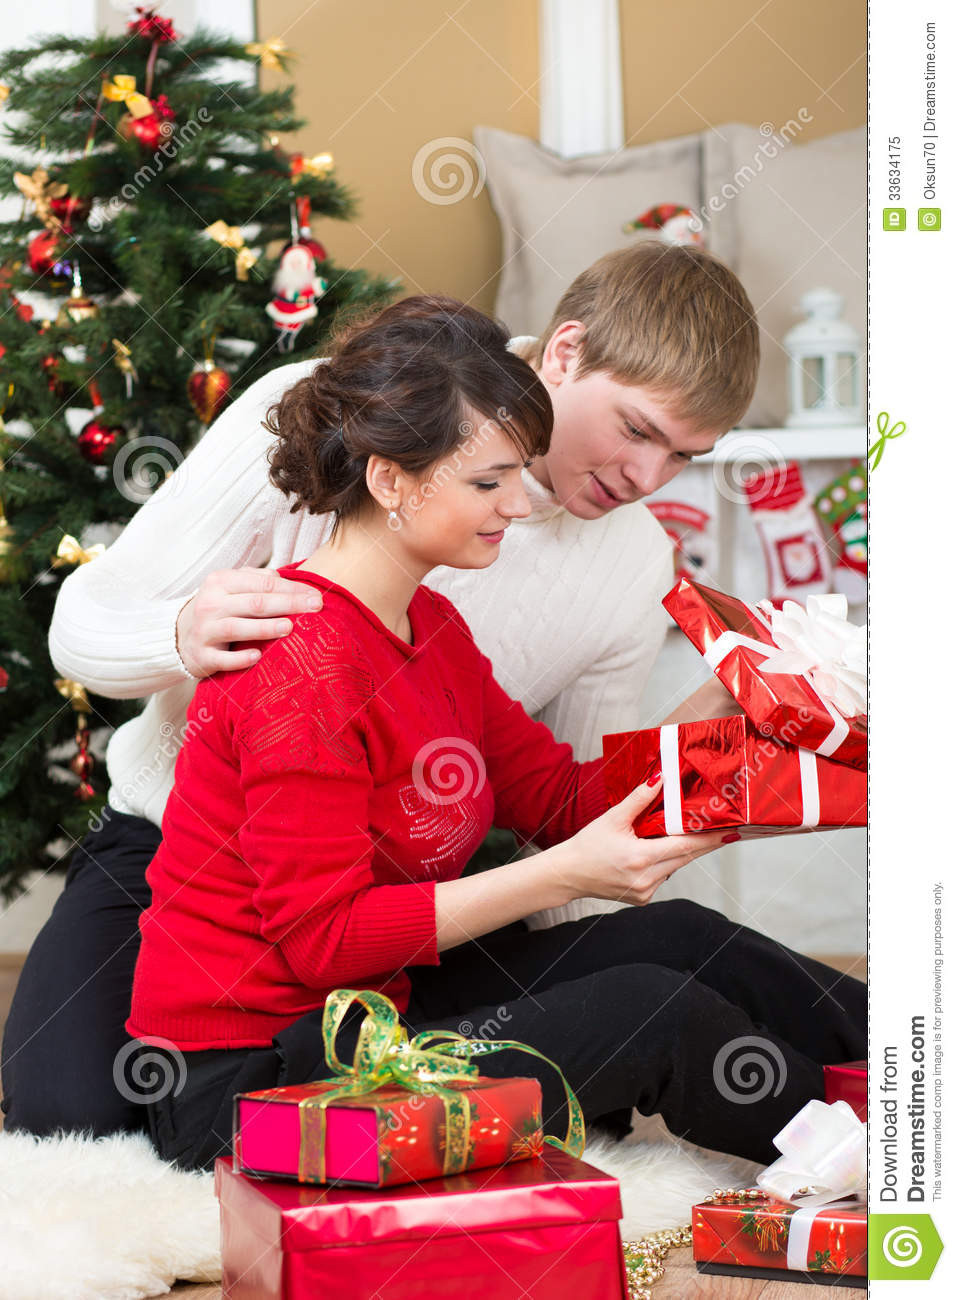 Christmas Gift Ideas For Young Couples
 Young Couple With Gifts In Front Christmas Tree Royalty